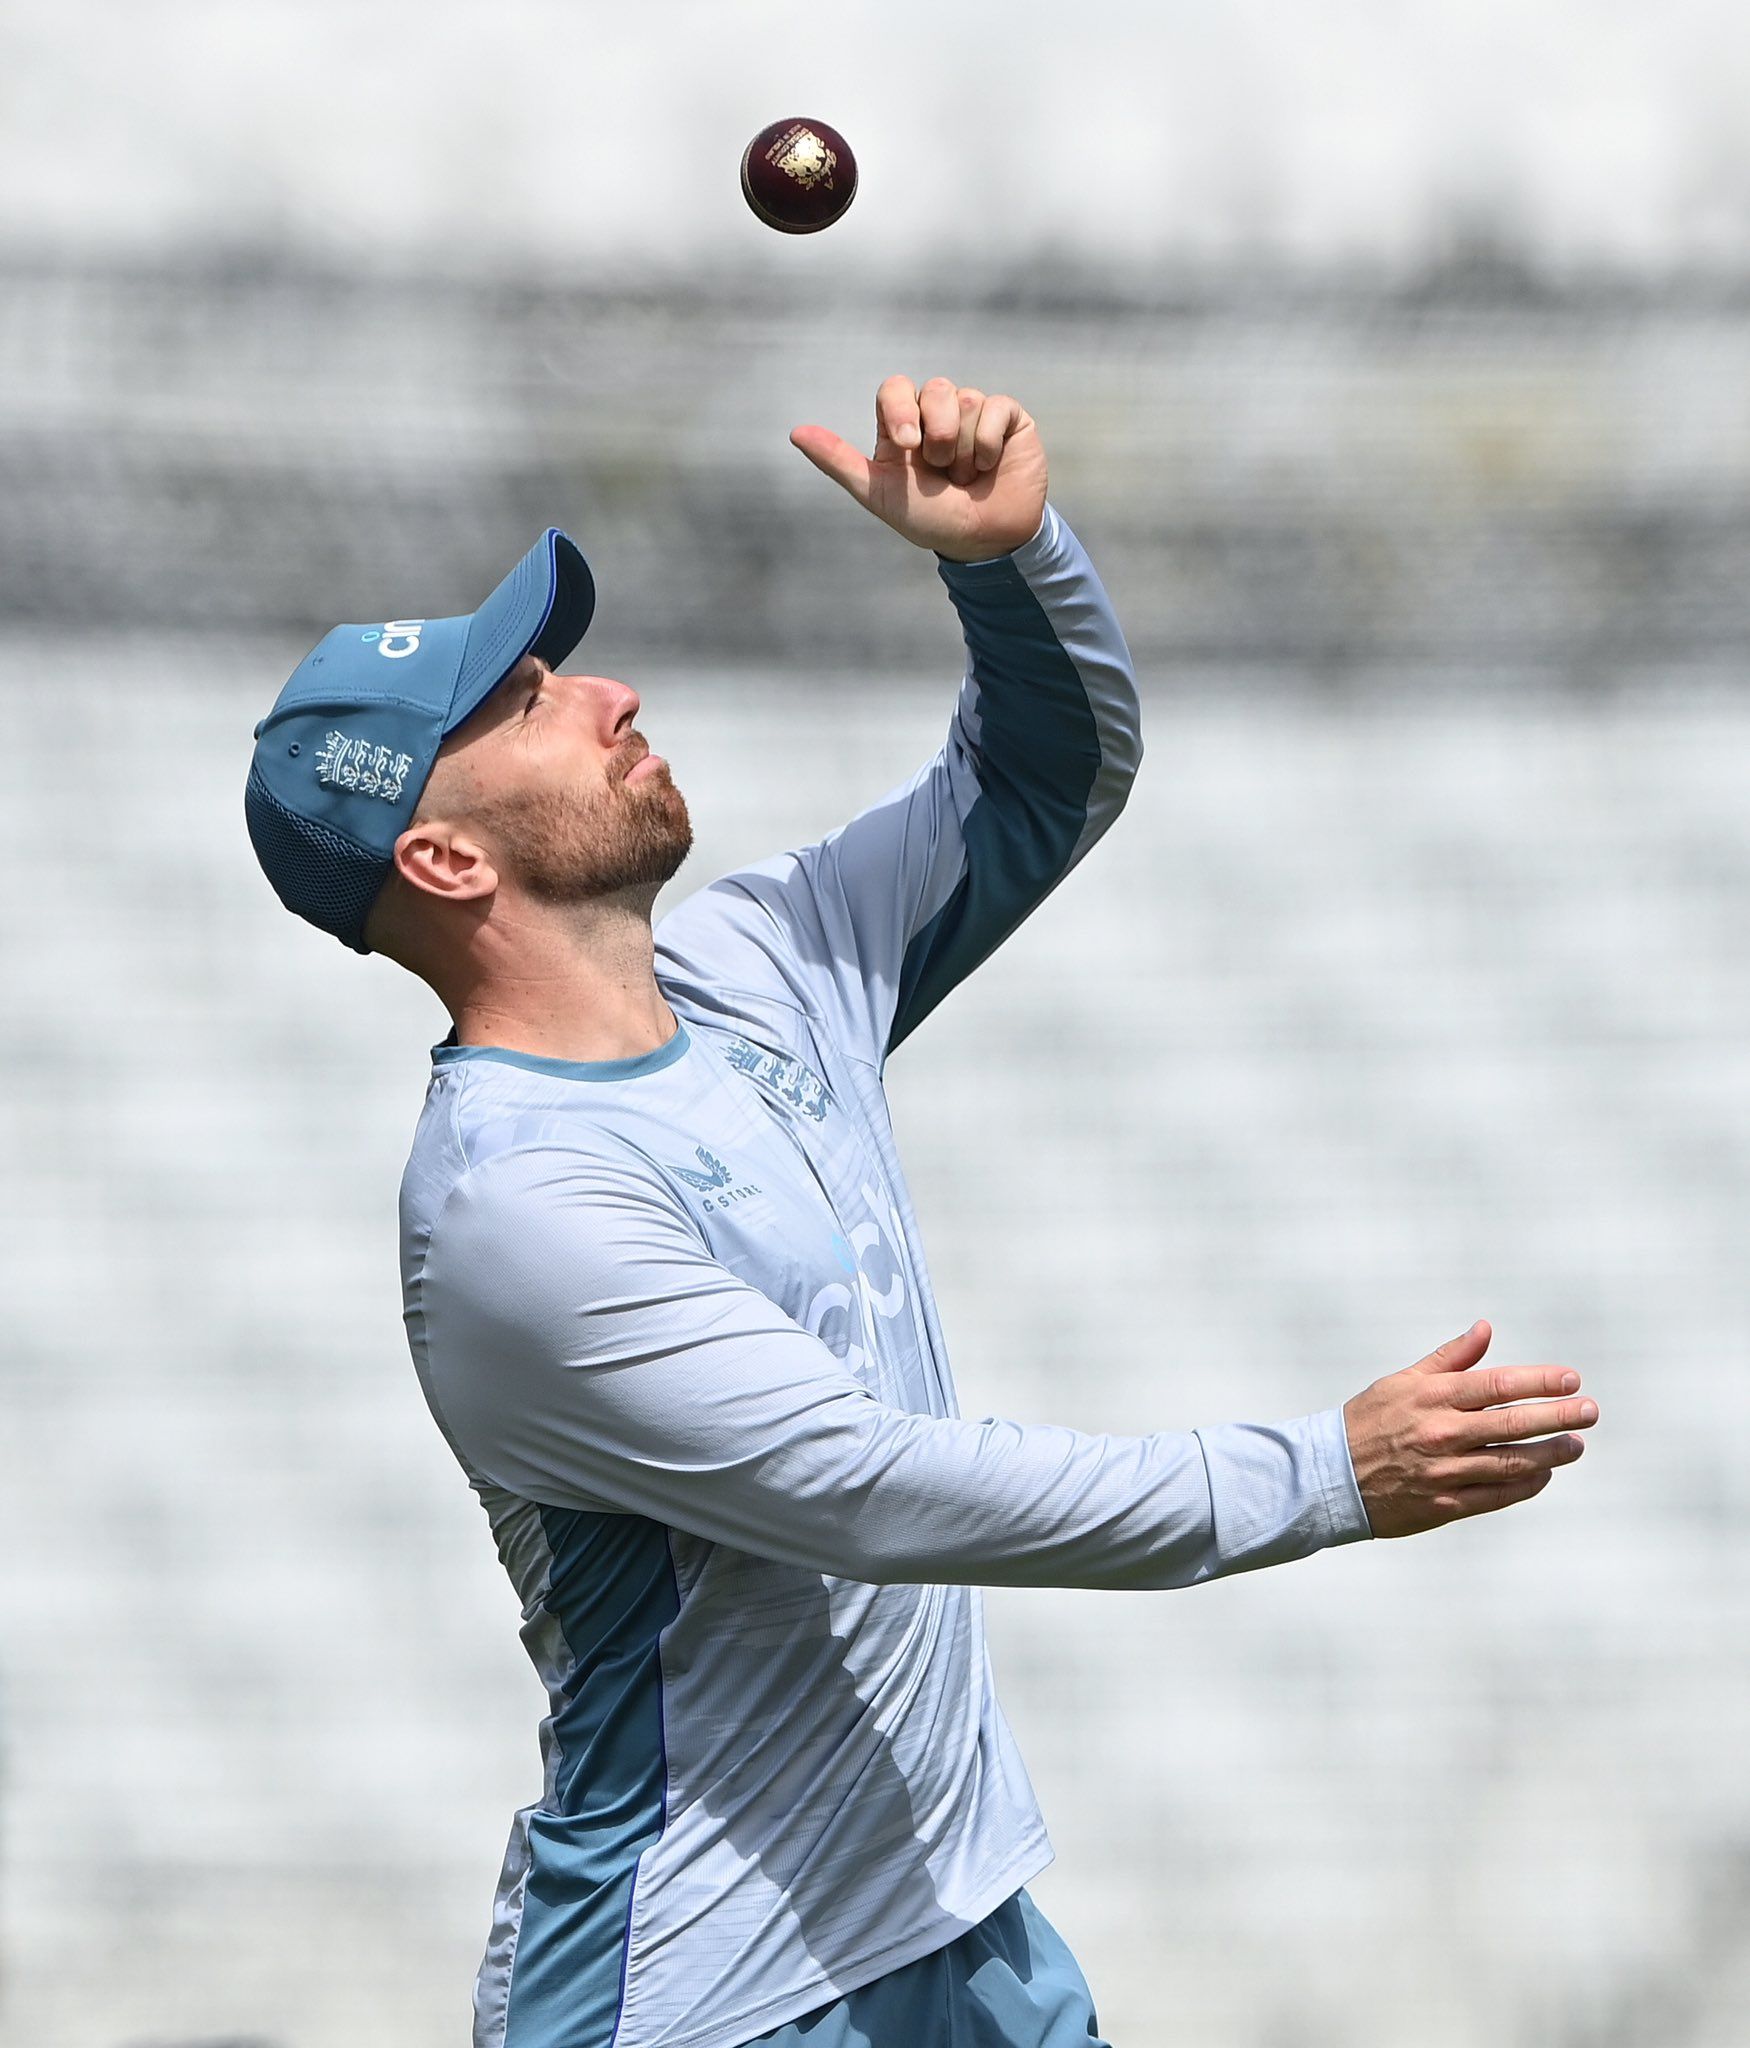 Jack Leach back in England’s playing 11 for second Test vs New Zealand